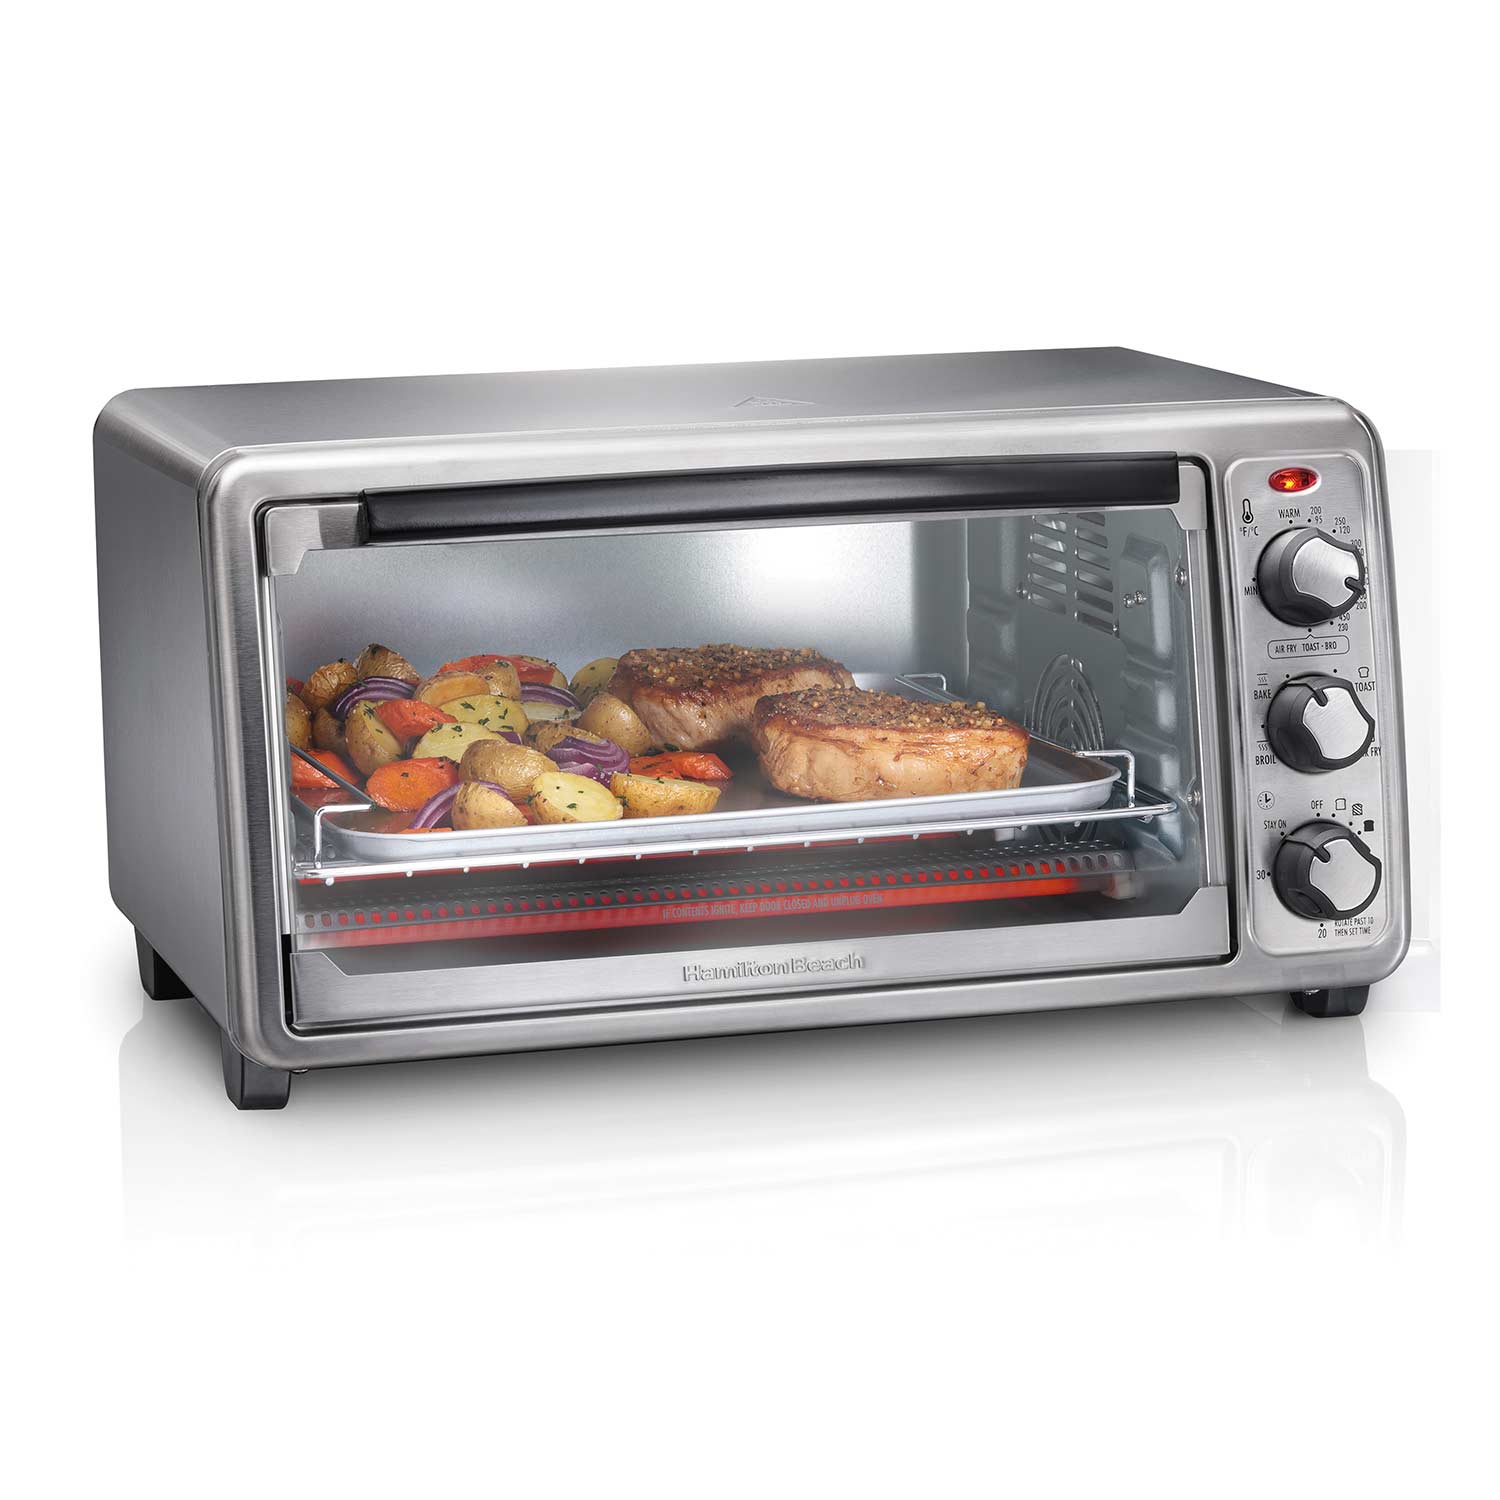 Sure-Crisp® Air Fryer Toaster Oven, Stainless Steel (31413)